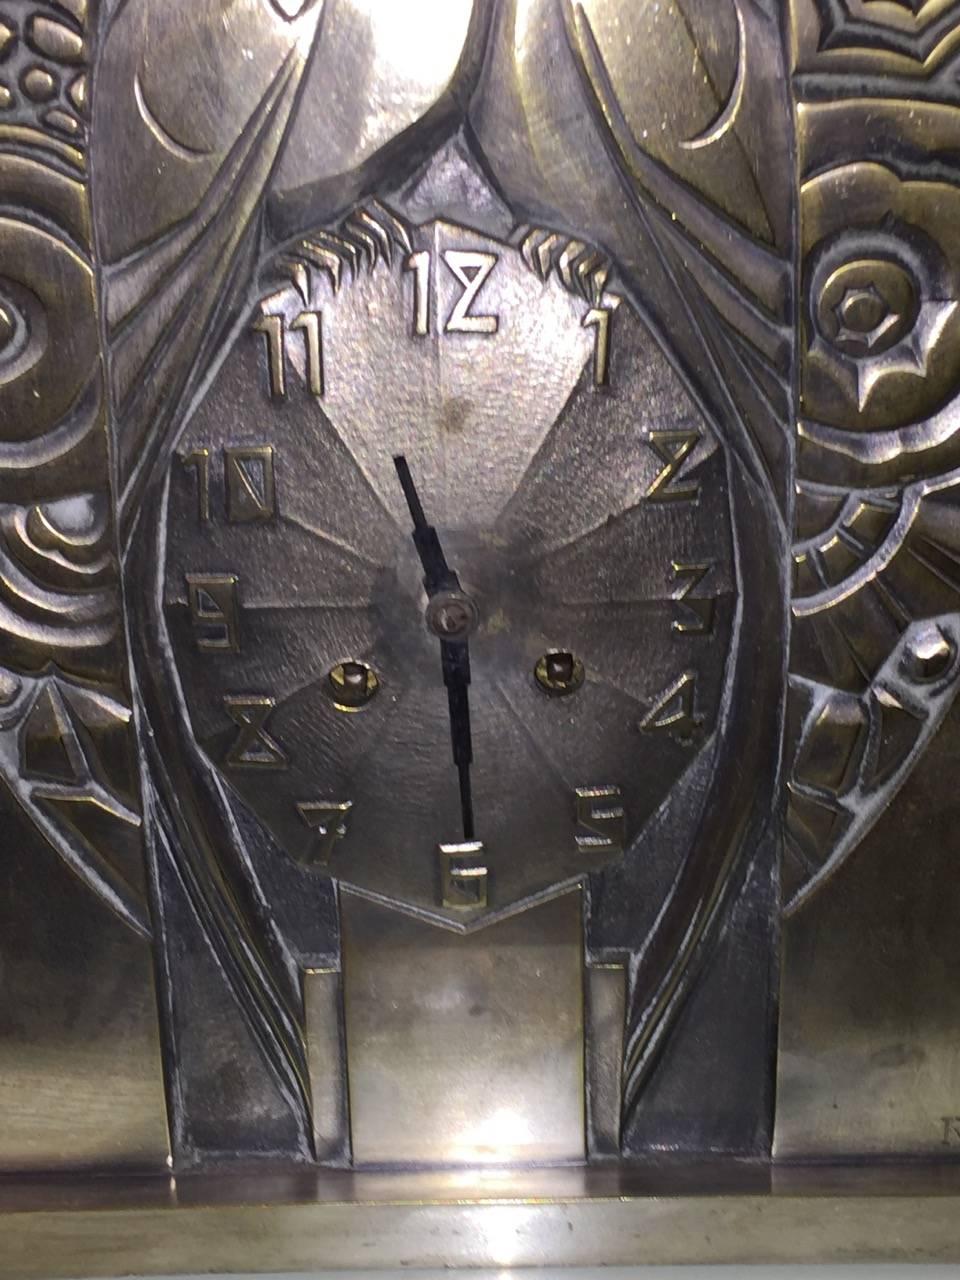 A truly magnificent and very rare R. Terras silvered bronze clock, this is by far the rarest model he has designed and it is stunning. It’s a great size for this type of clock and is in superb all round original condition with and original patina